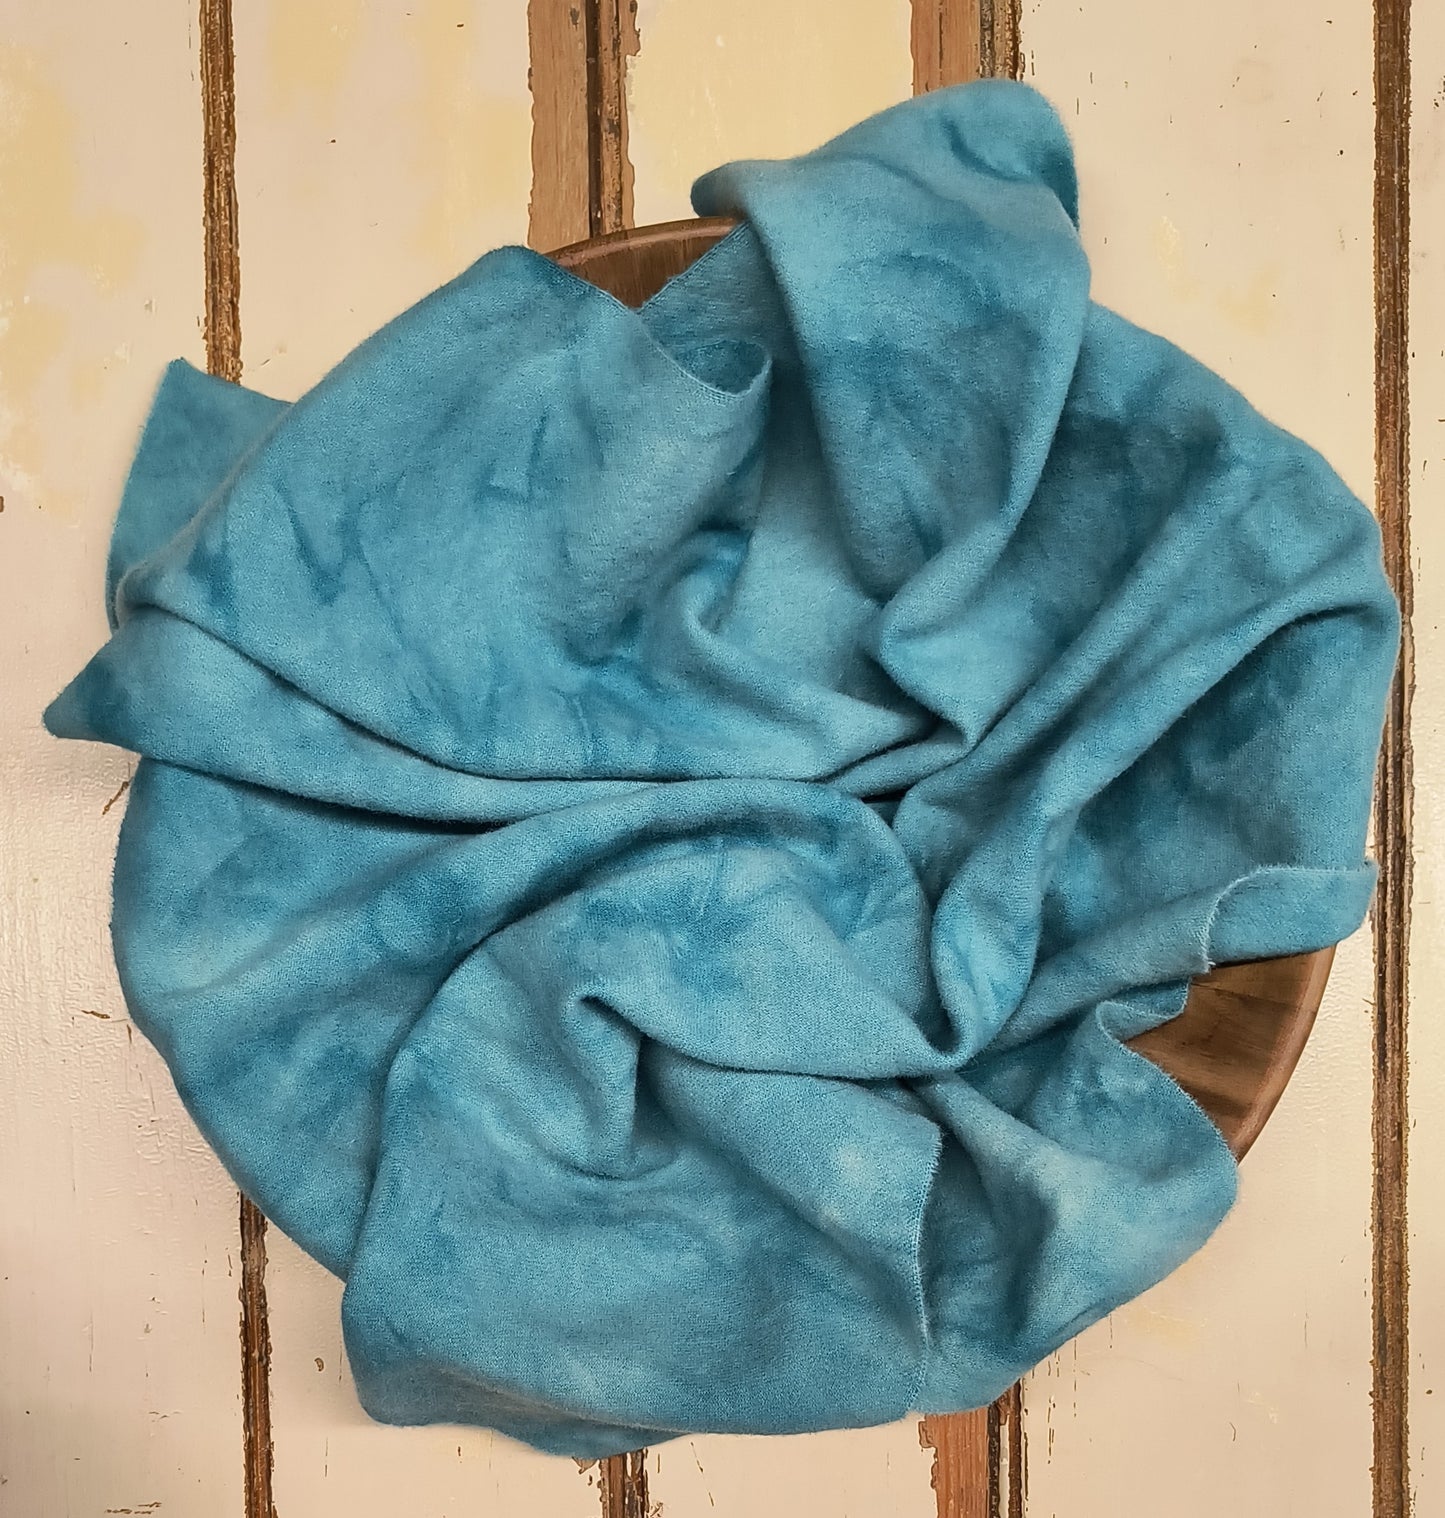 HERITAGE VALUES M | Set of 4 Hand Dyed Wool